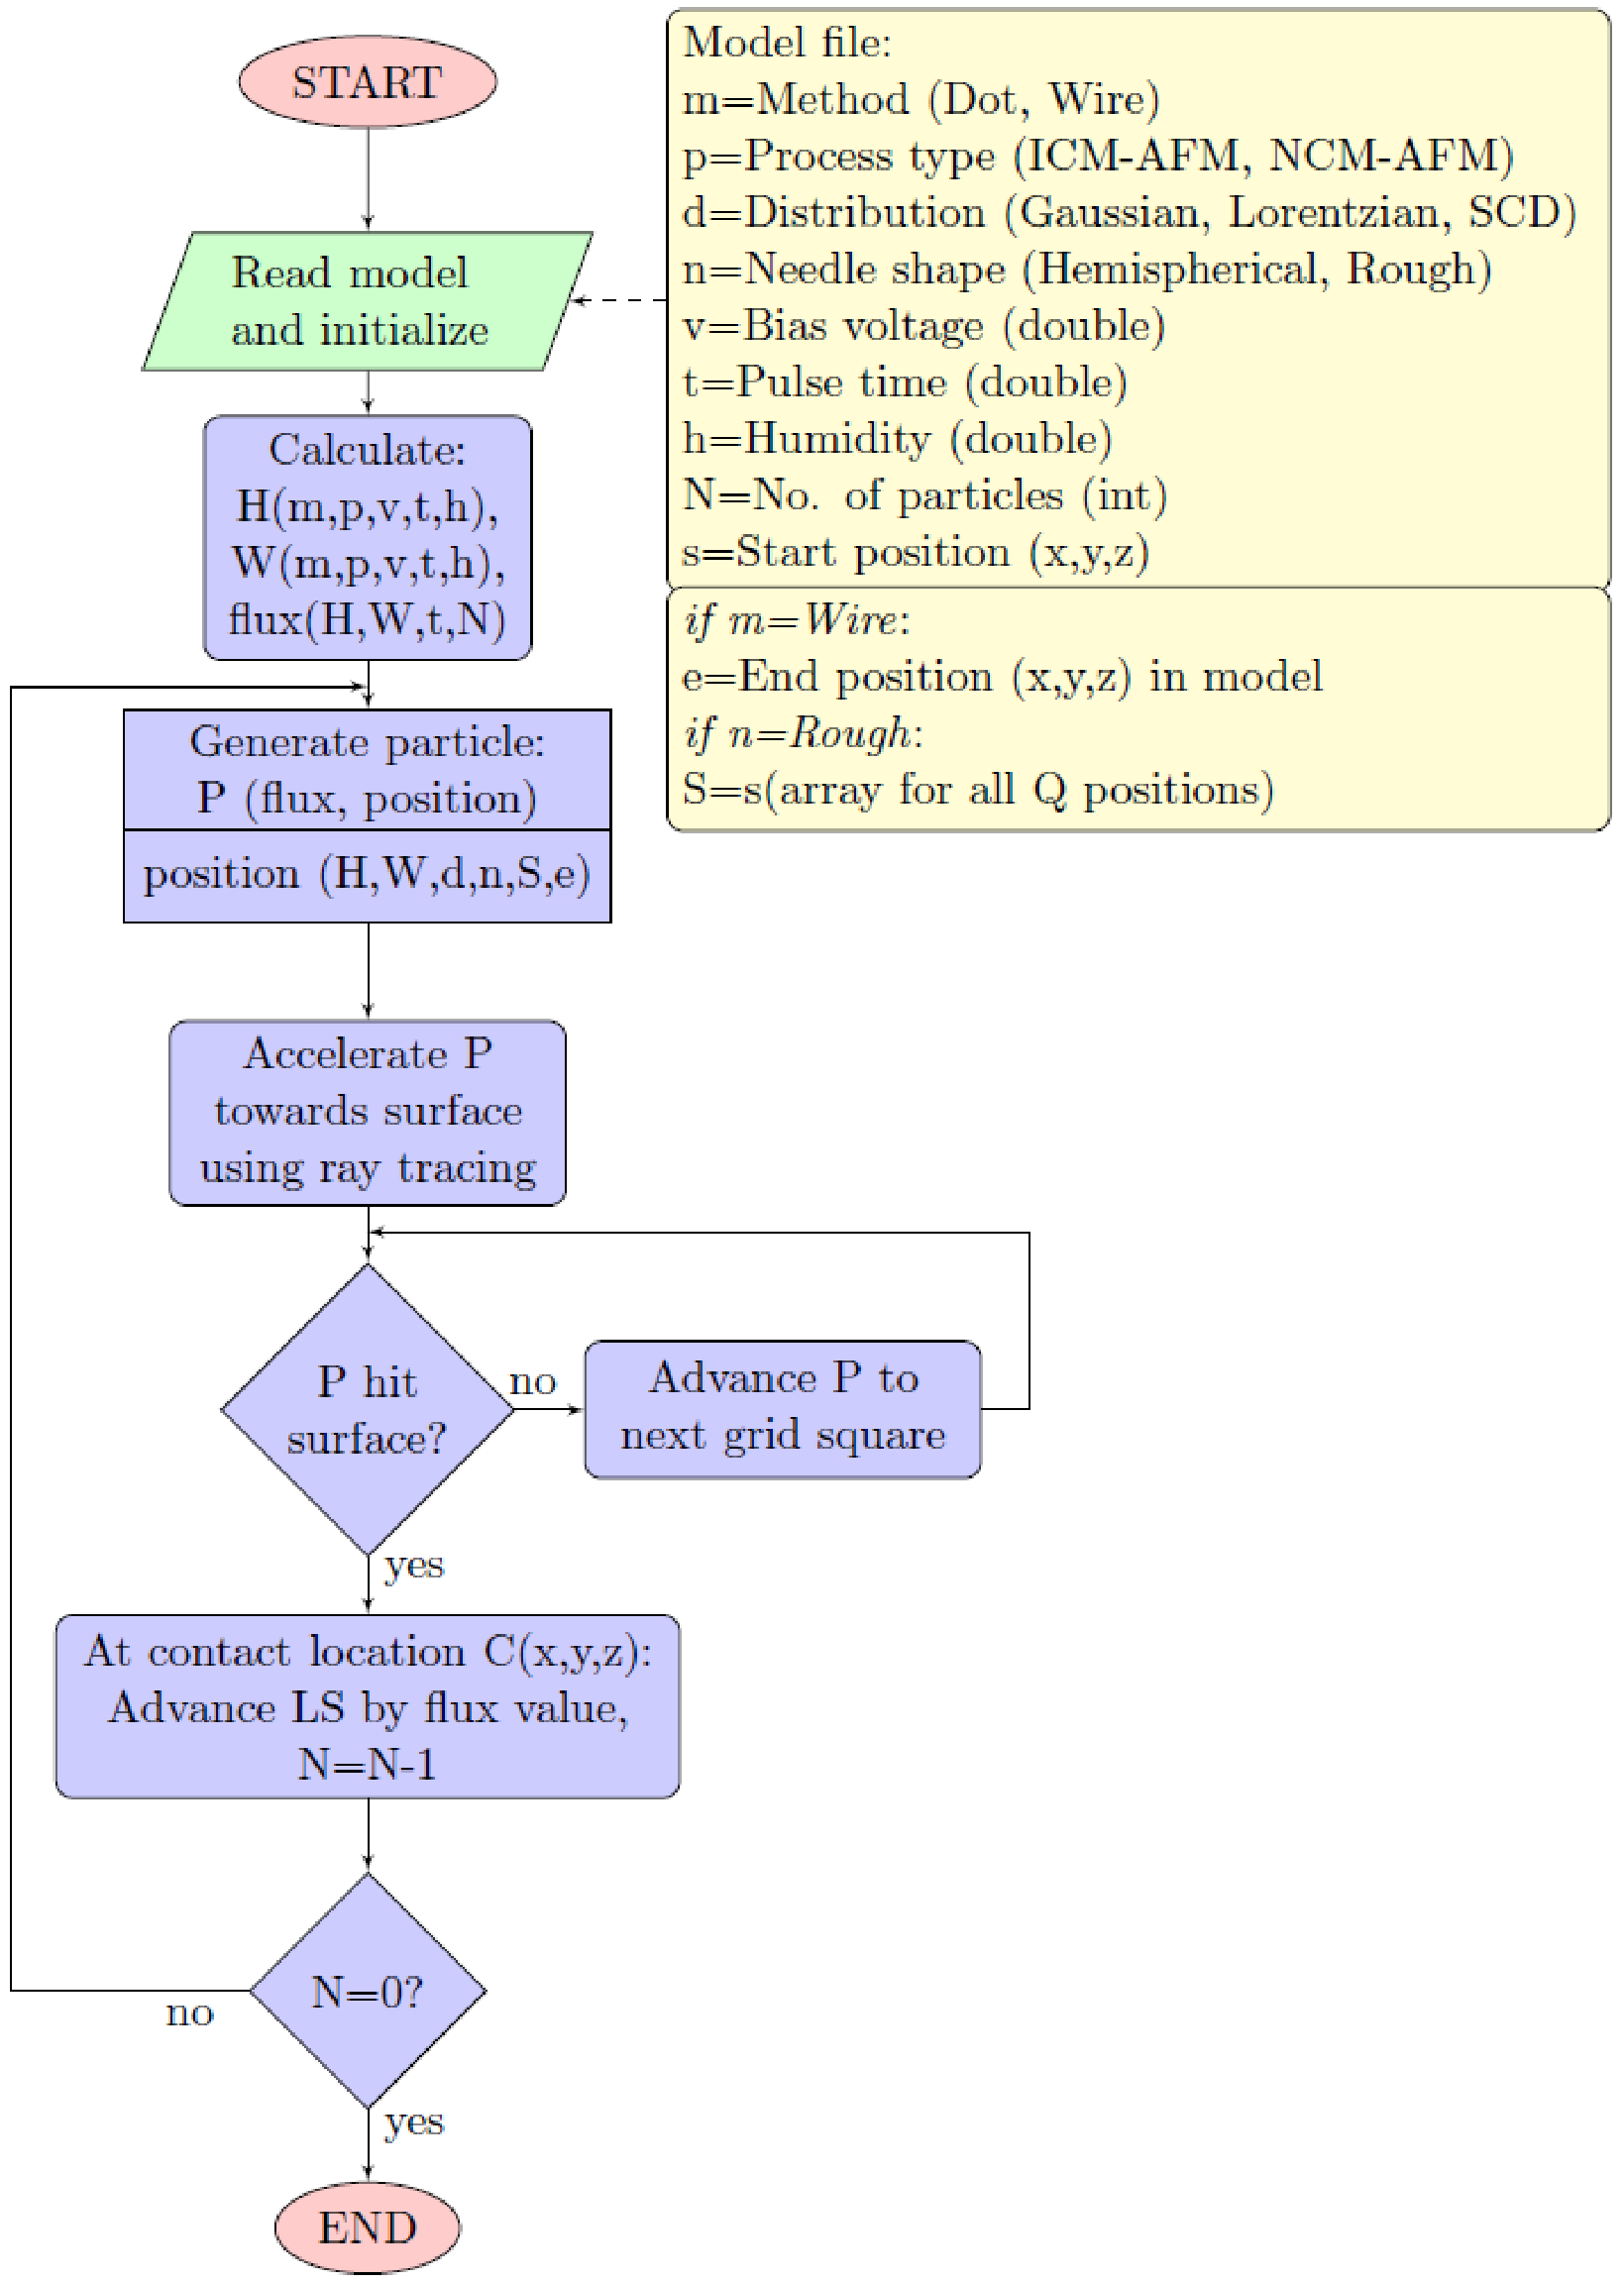 \includegraphics[width=0.9\linewidth]{chapter_oxidation_modeling/figures/flowchart.eps}